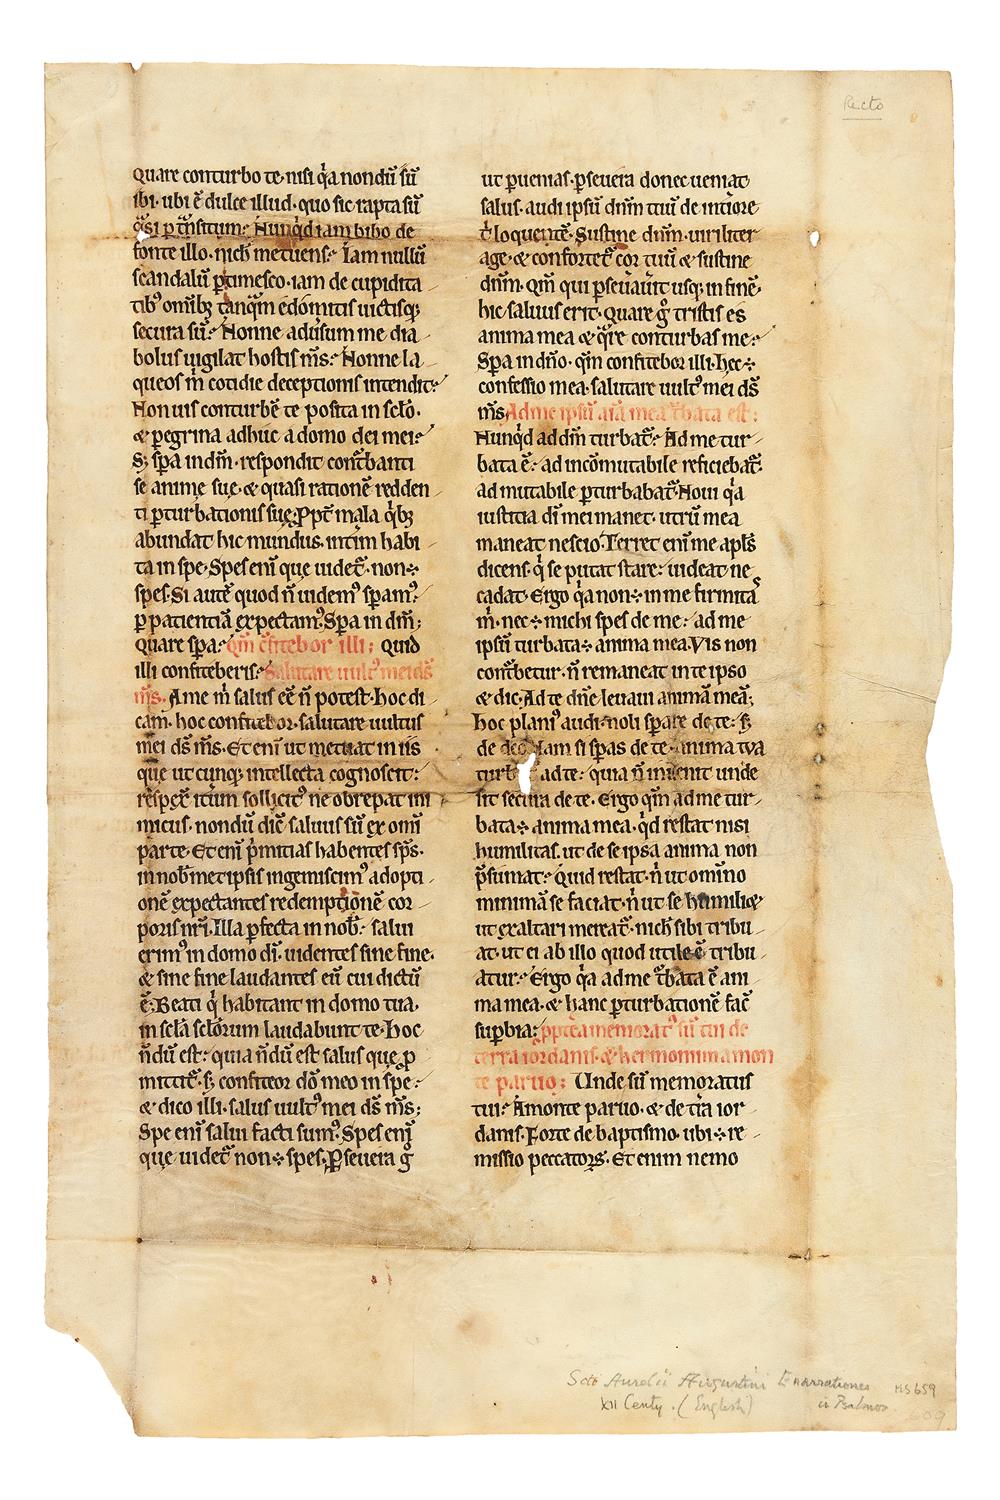 Ɵ Augustine, Enarrationes in Psalmos, in Latin, manuscript on parchment [England, 12th century]